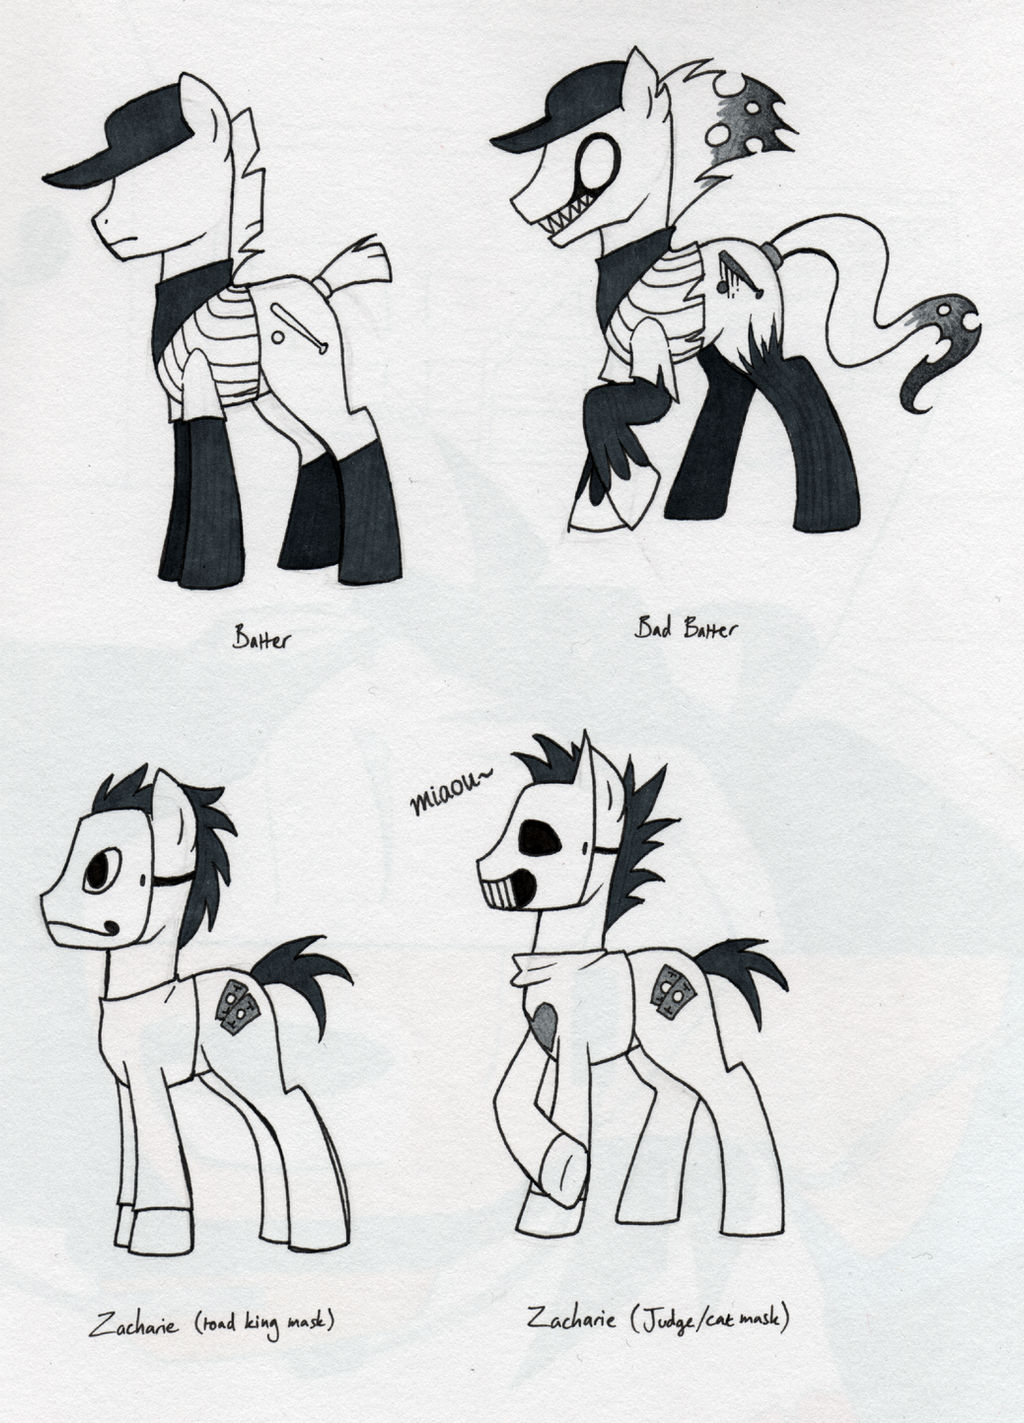 OFF - The Batter and Zacharie as ponies